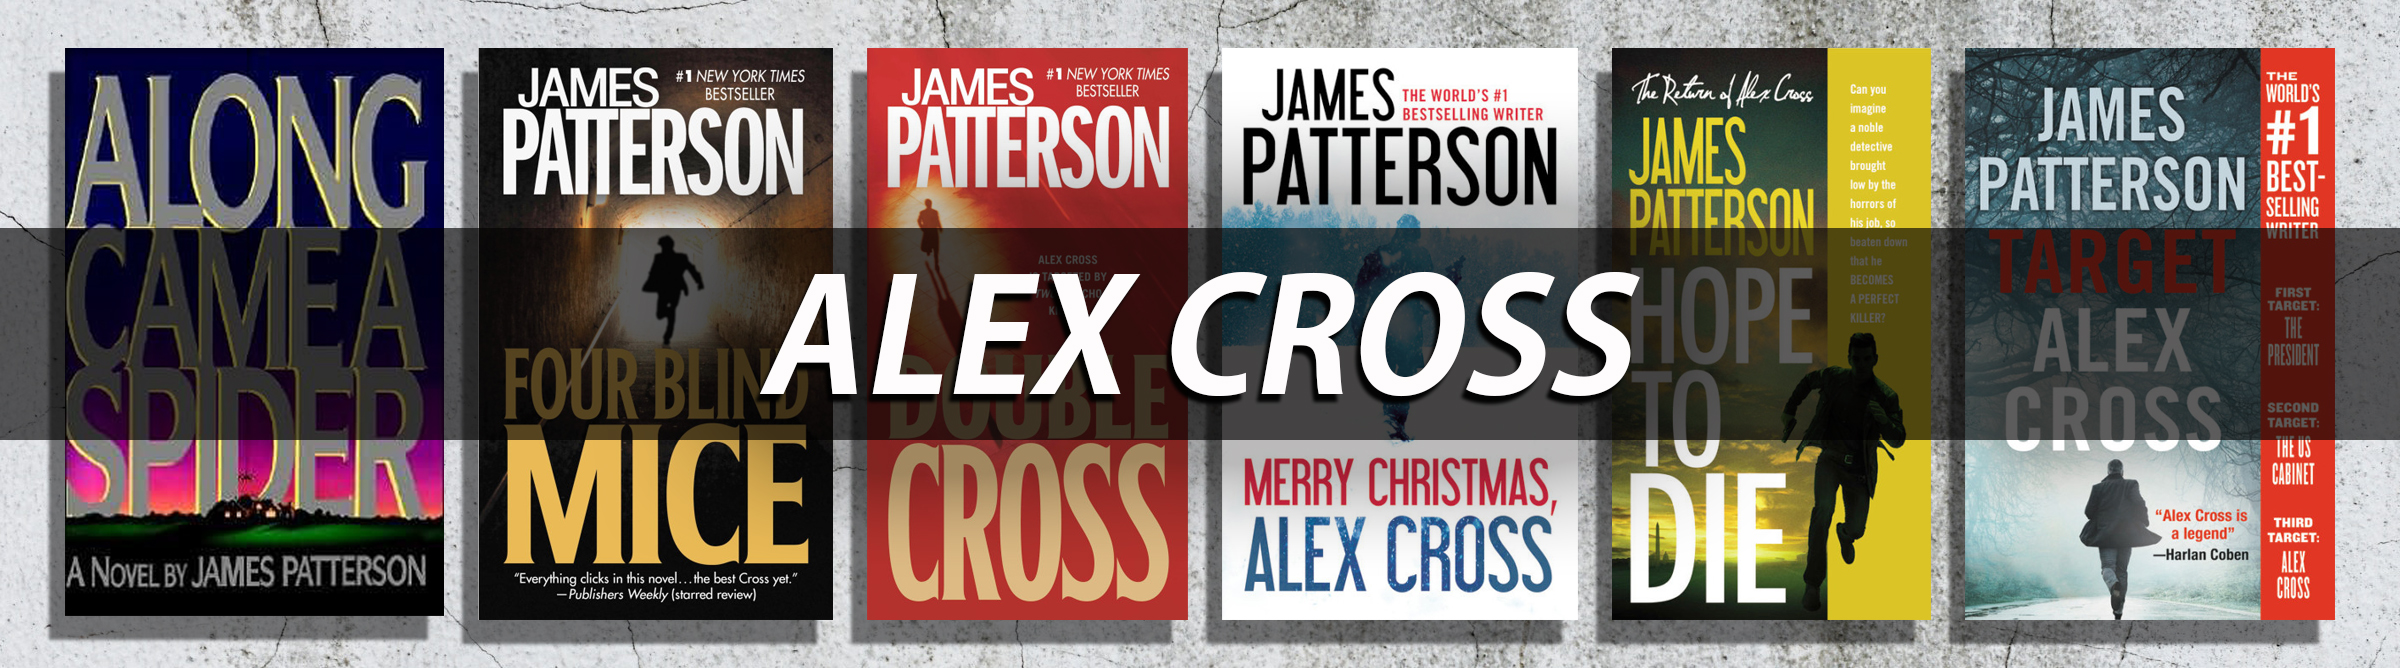 James Patterson's Alex Cross Series - Books in Order | Novel Suspects